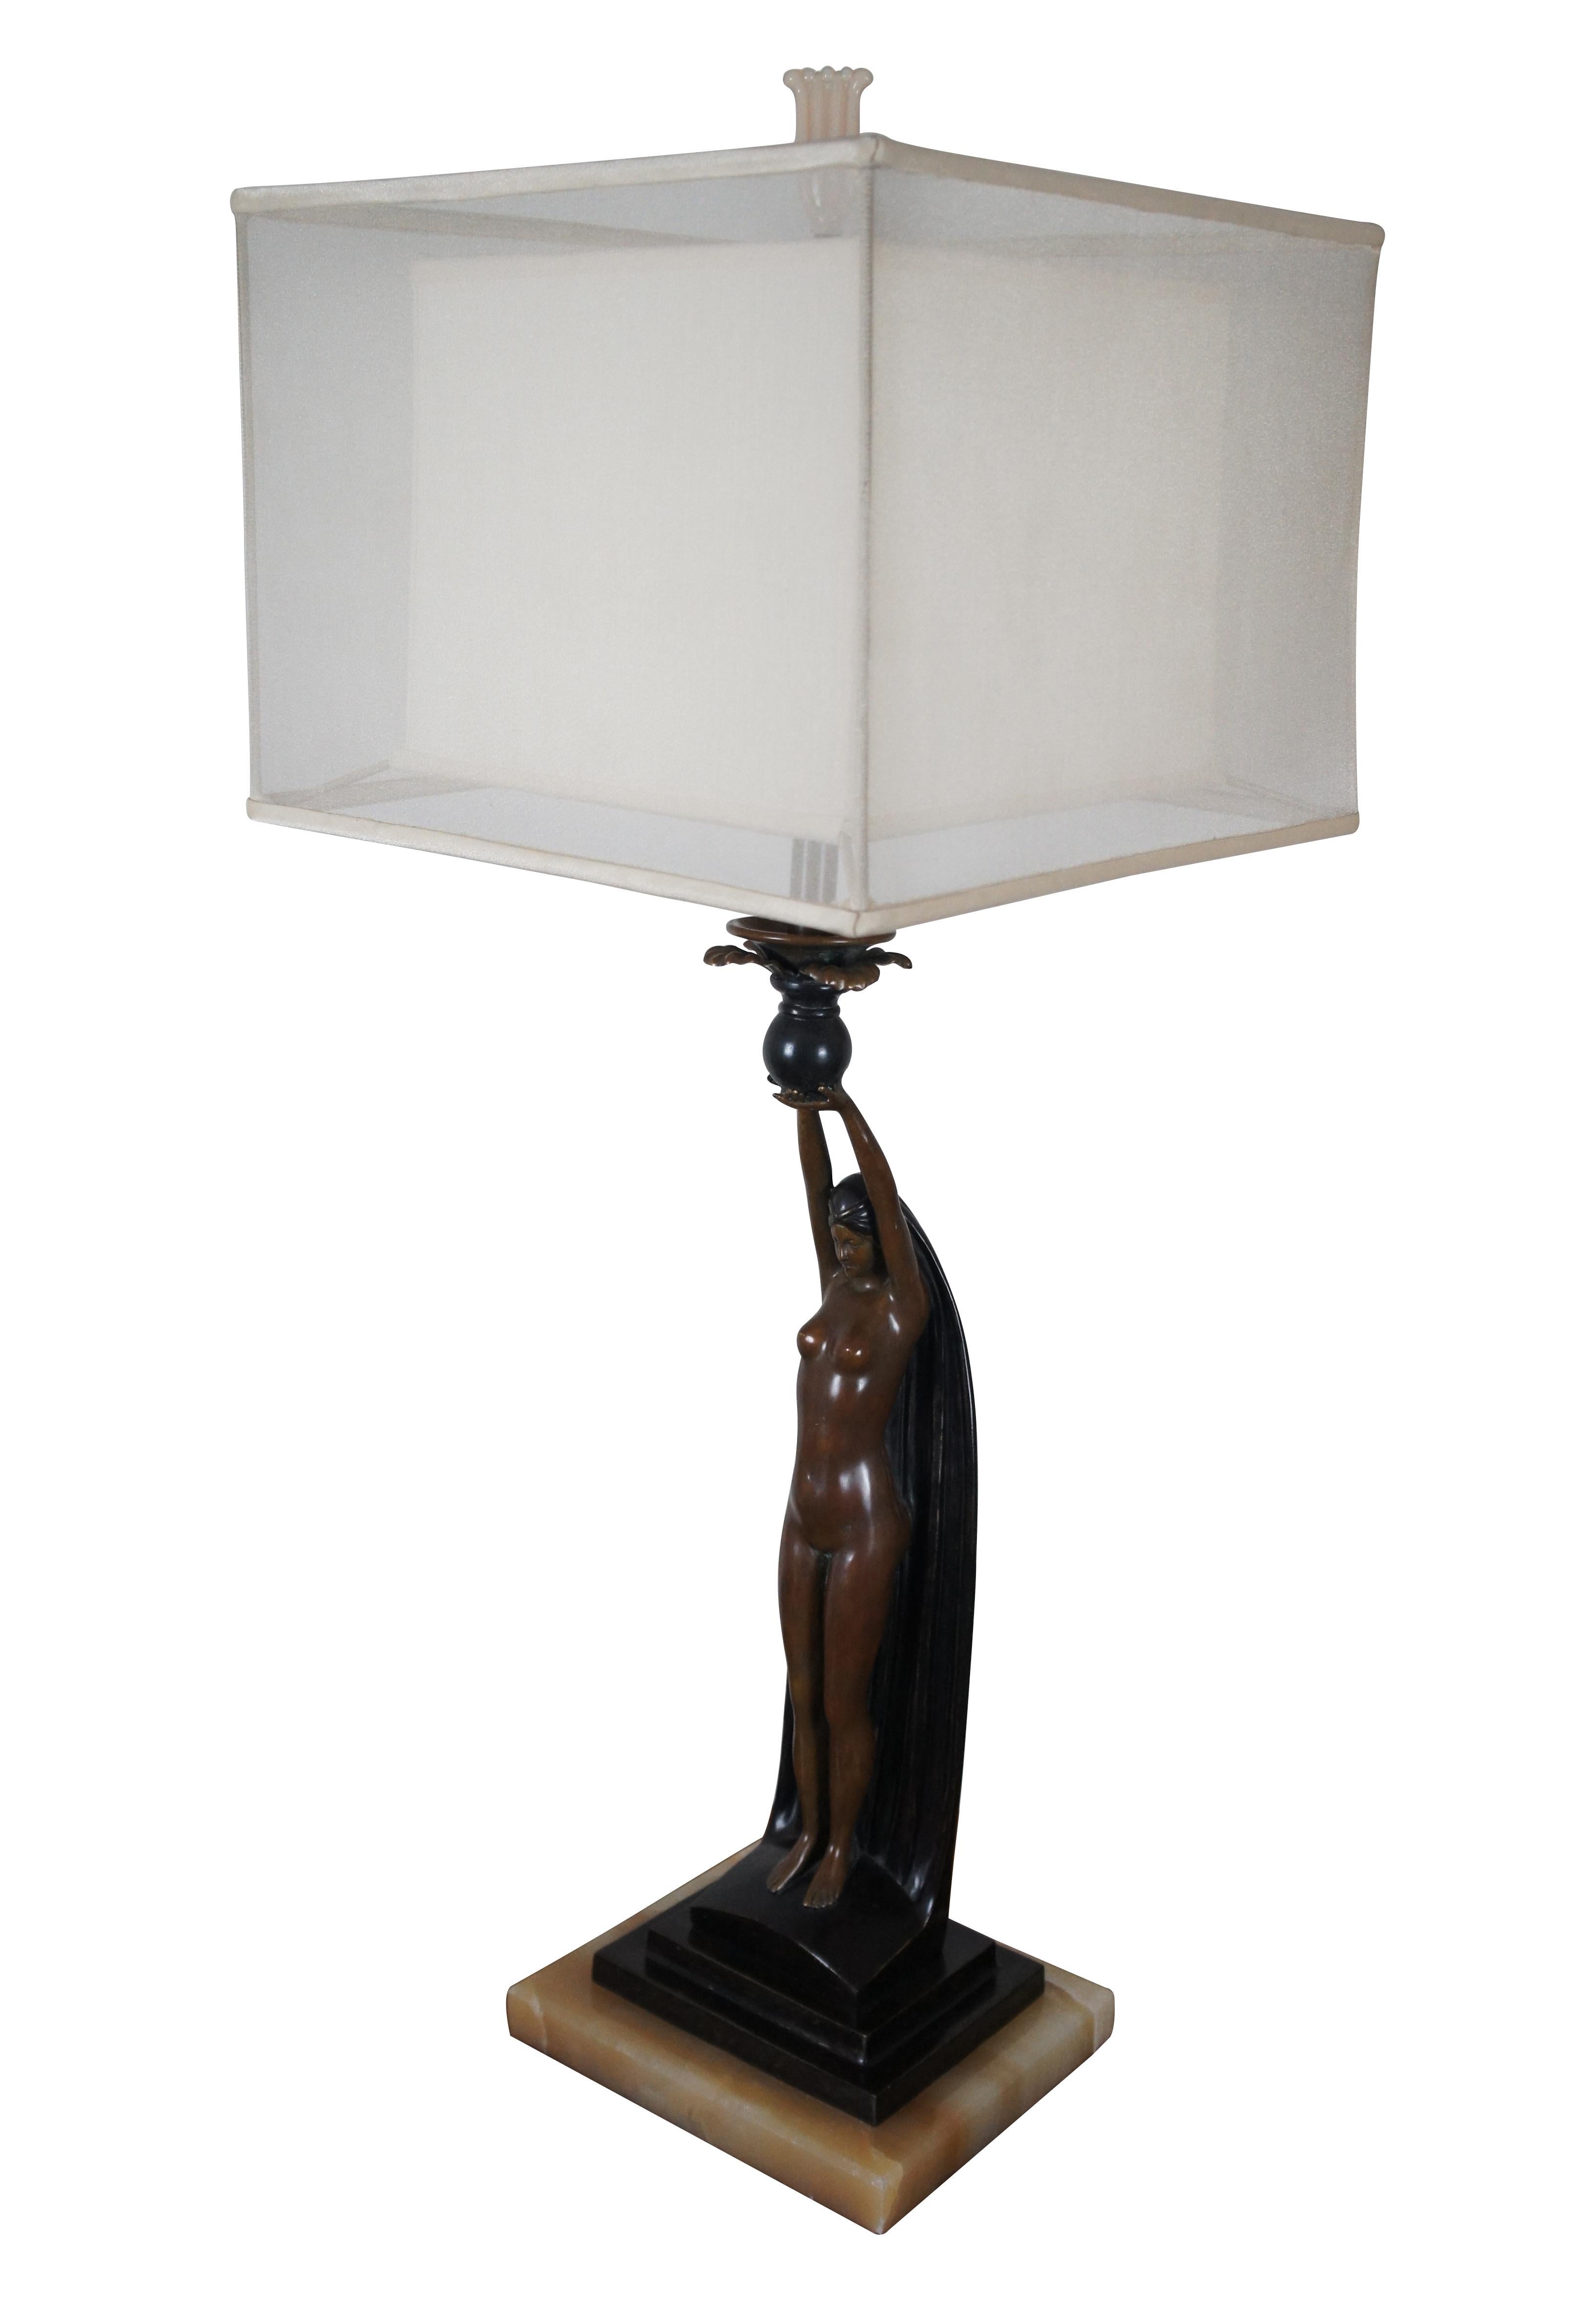 An impressive pair of table lamps featuring heavy bronze Art Deco female nude figures lifting vases topped with leaves, standing on tiered plinths with white marble bases. These stunning lamps are finished with Art Deco era flower shaped glass